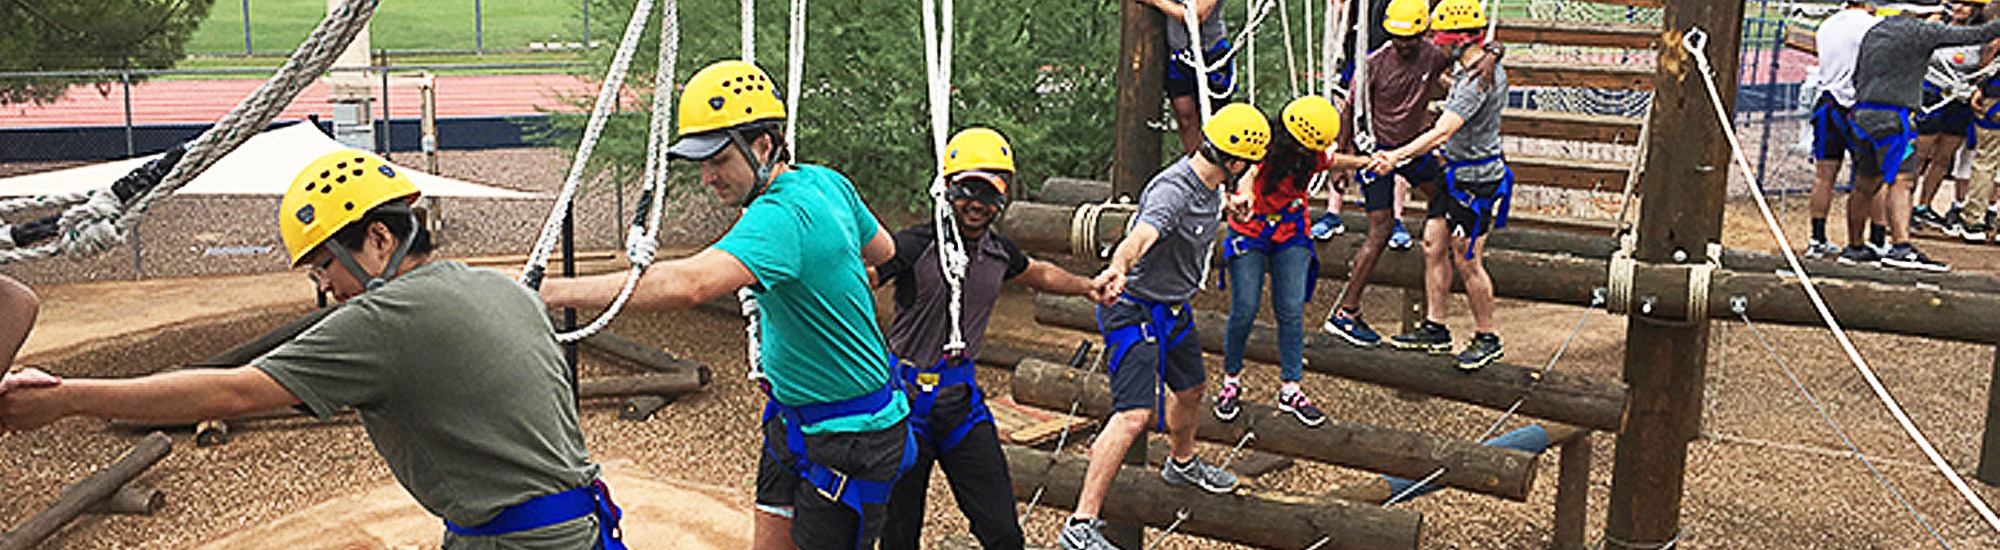 Group of people working together to complete an obstacle course